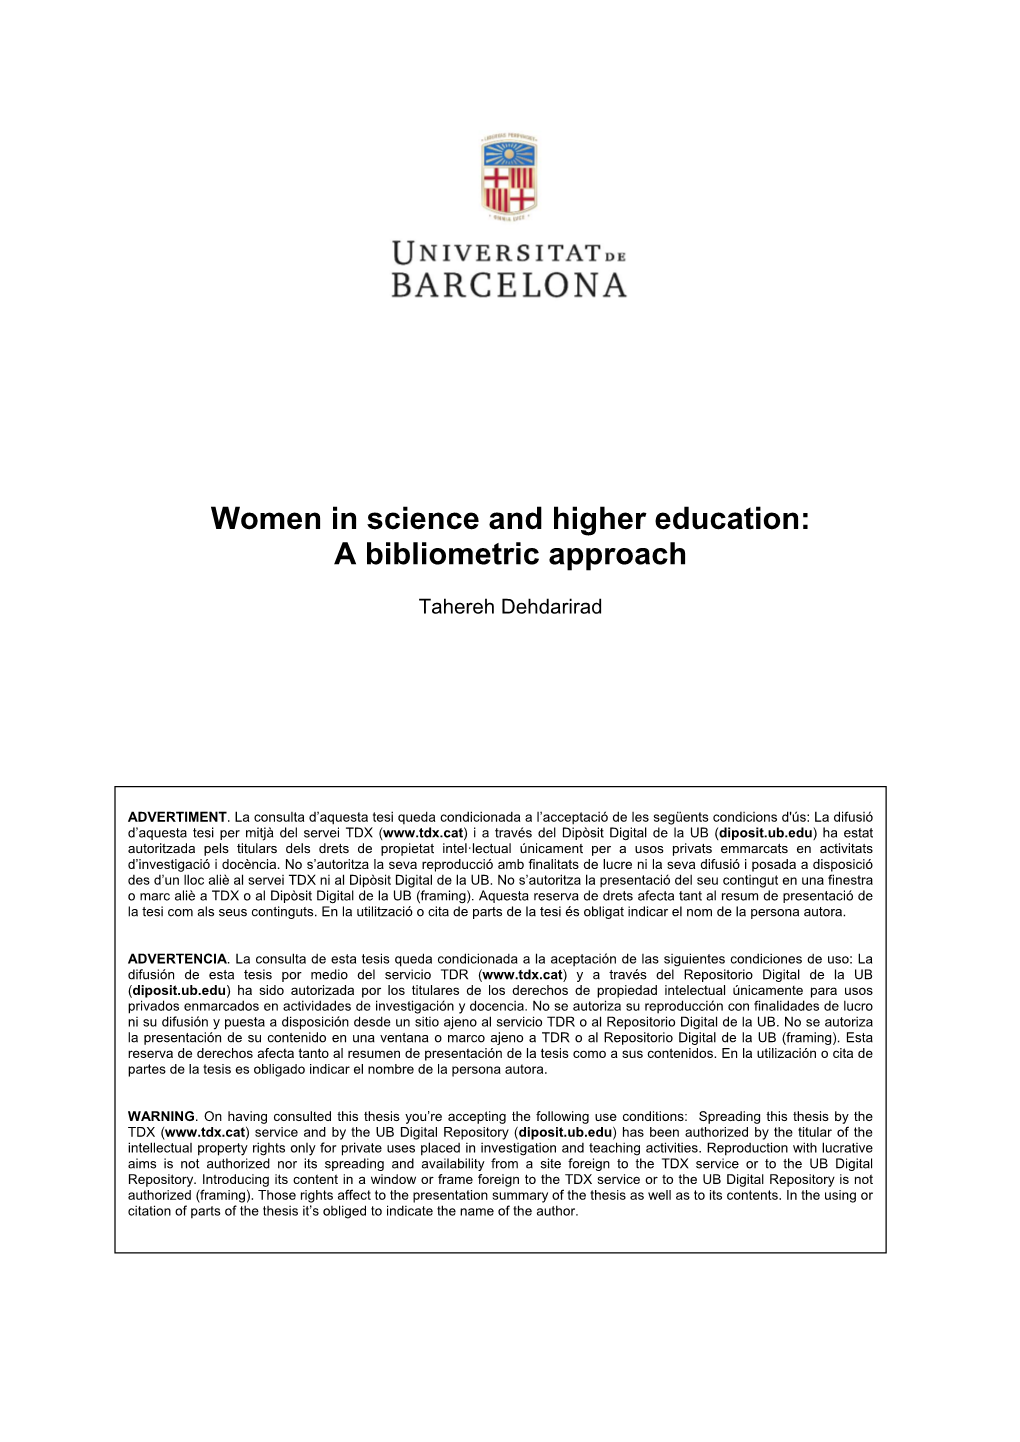 Women in Science and Higher Education: a Bibliometric Approach